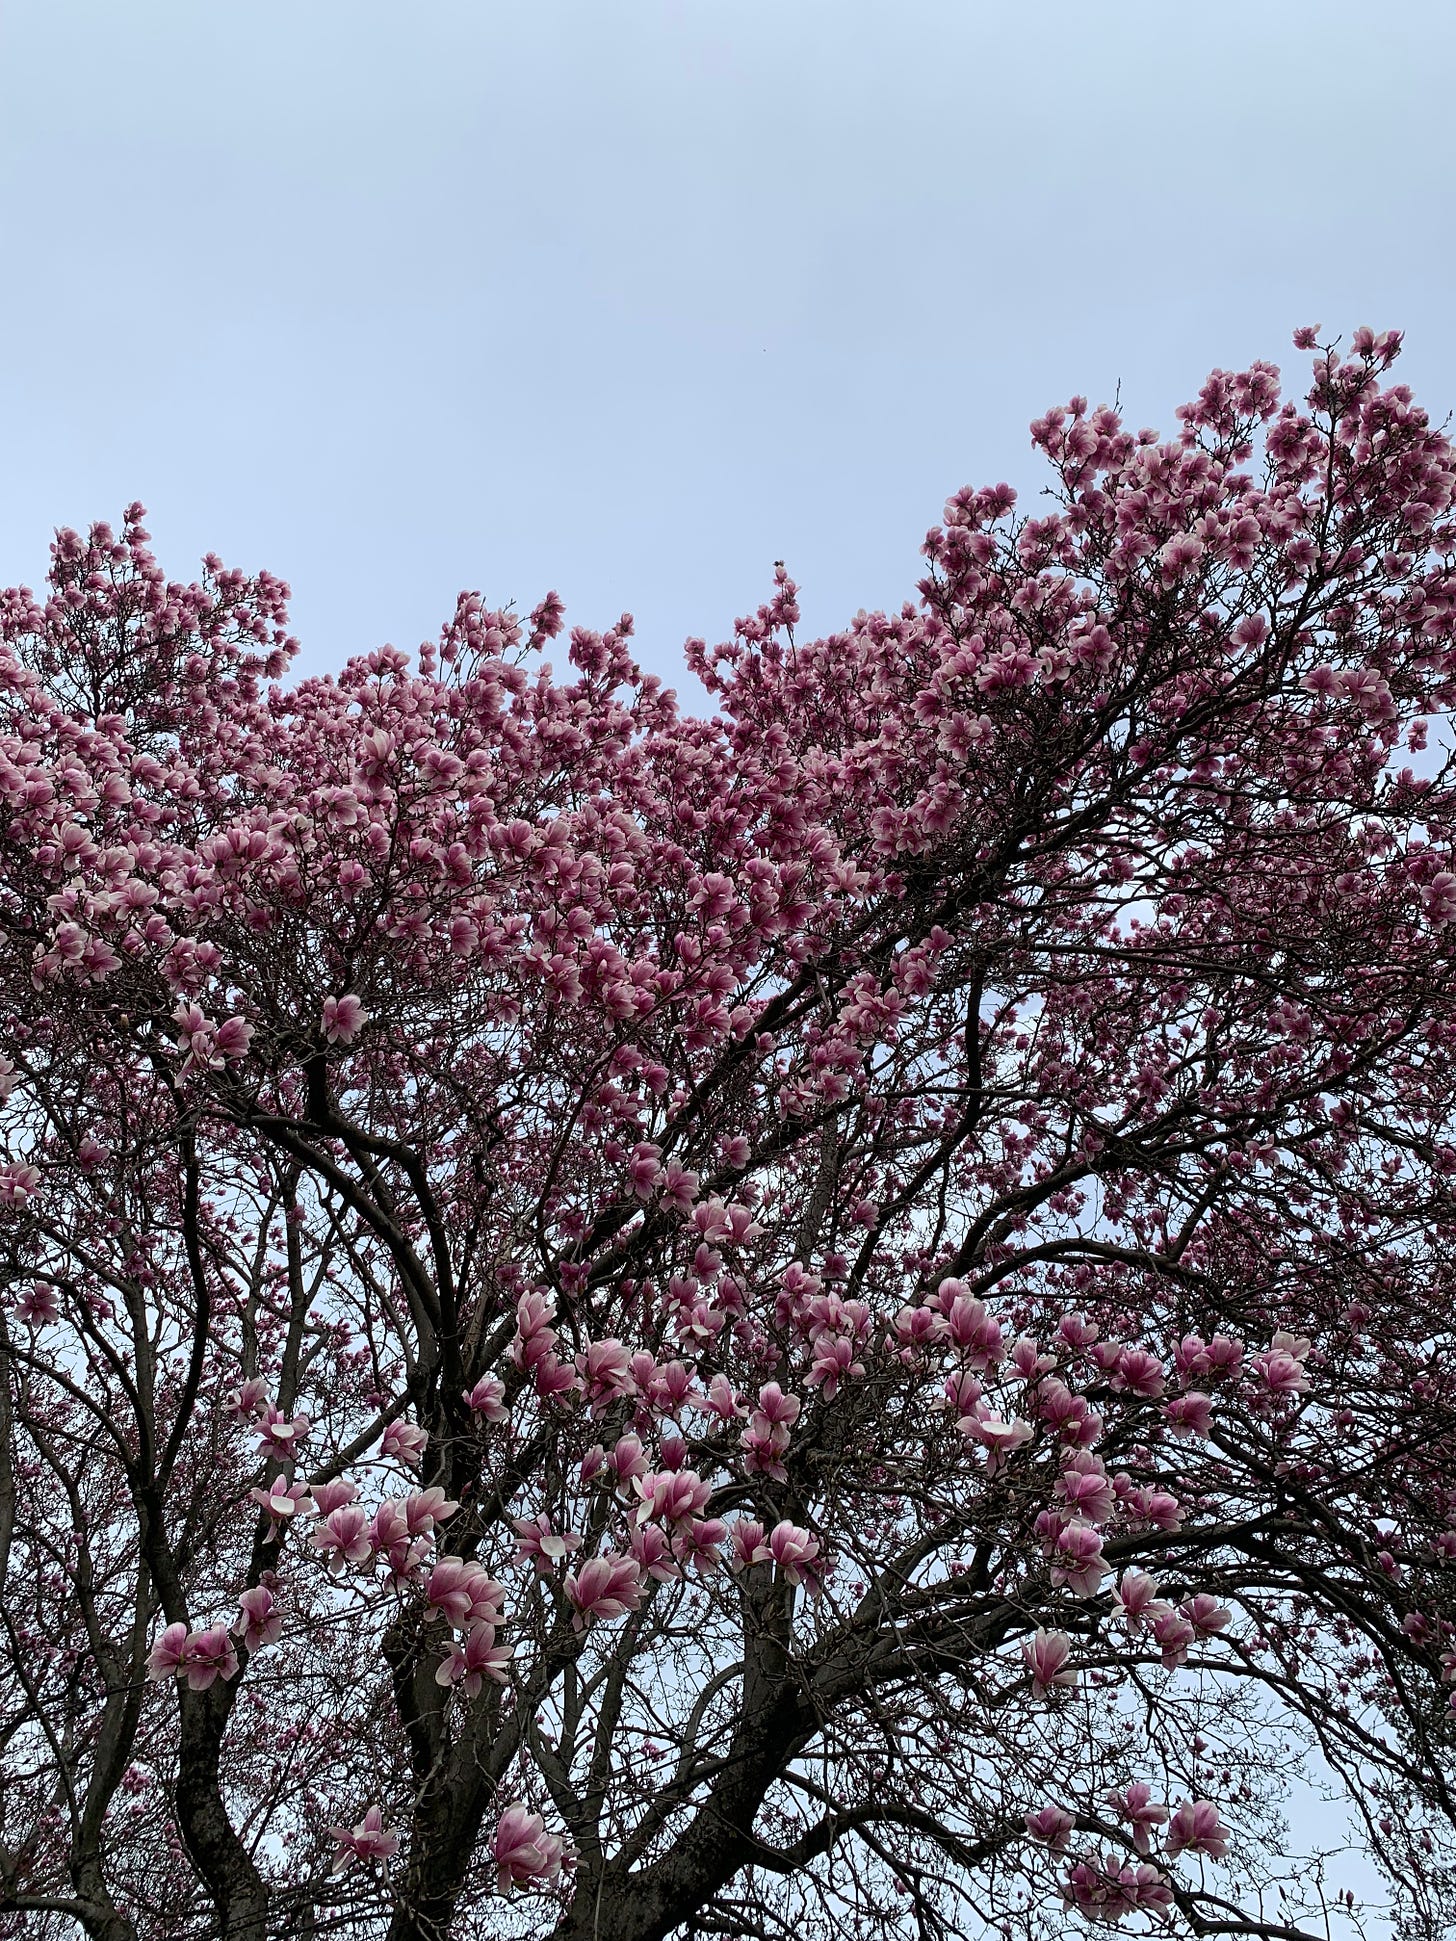 A photo taken from the ground looking up at a tree that is flowering with pink and white petals against a blue gray sky.